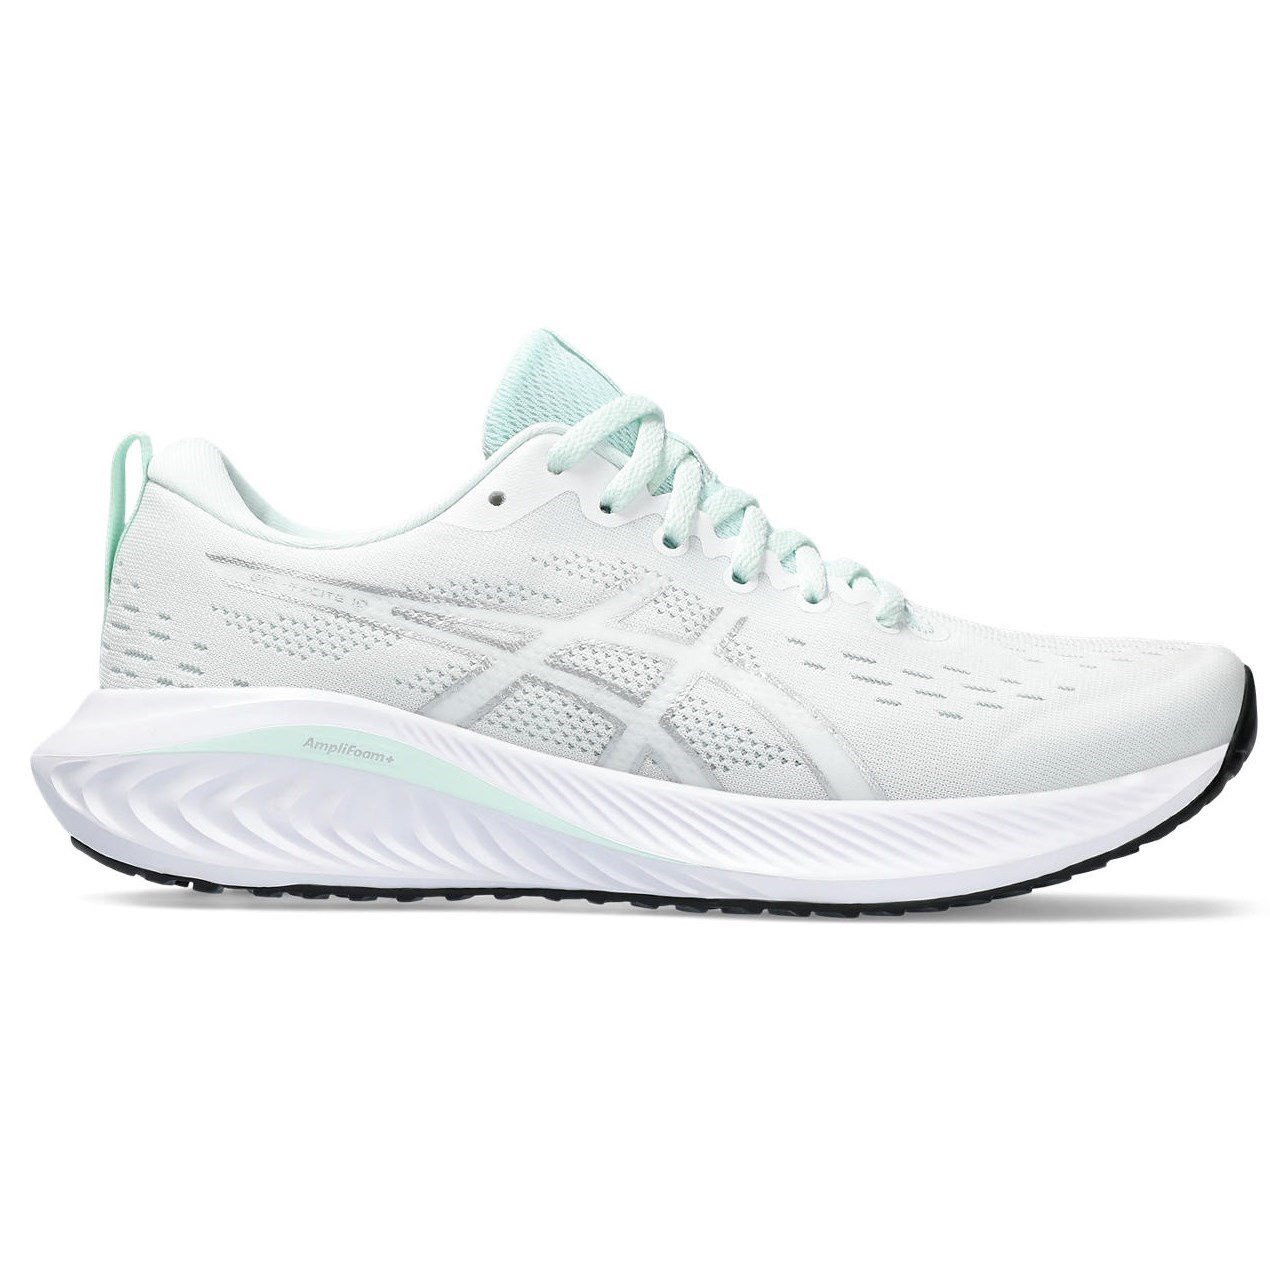 Asics Gel Excite 10 - Womens Running Shoes - White/Pure Silver | Sportitude